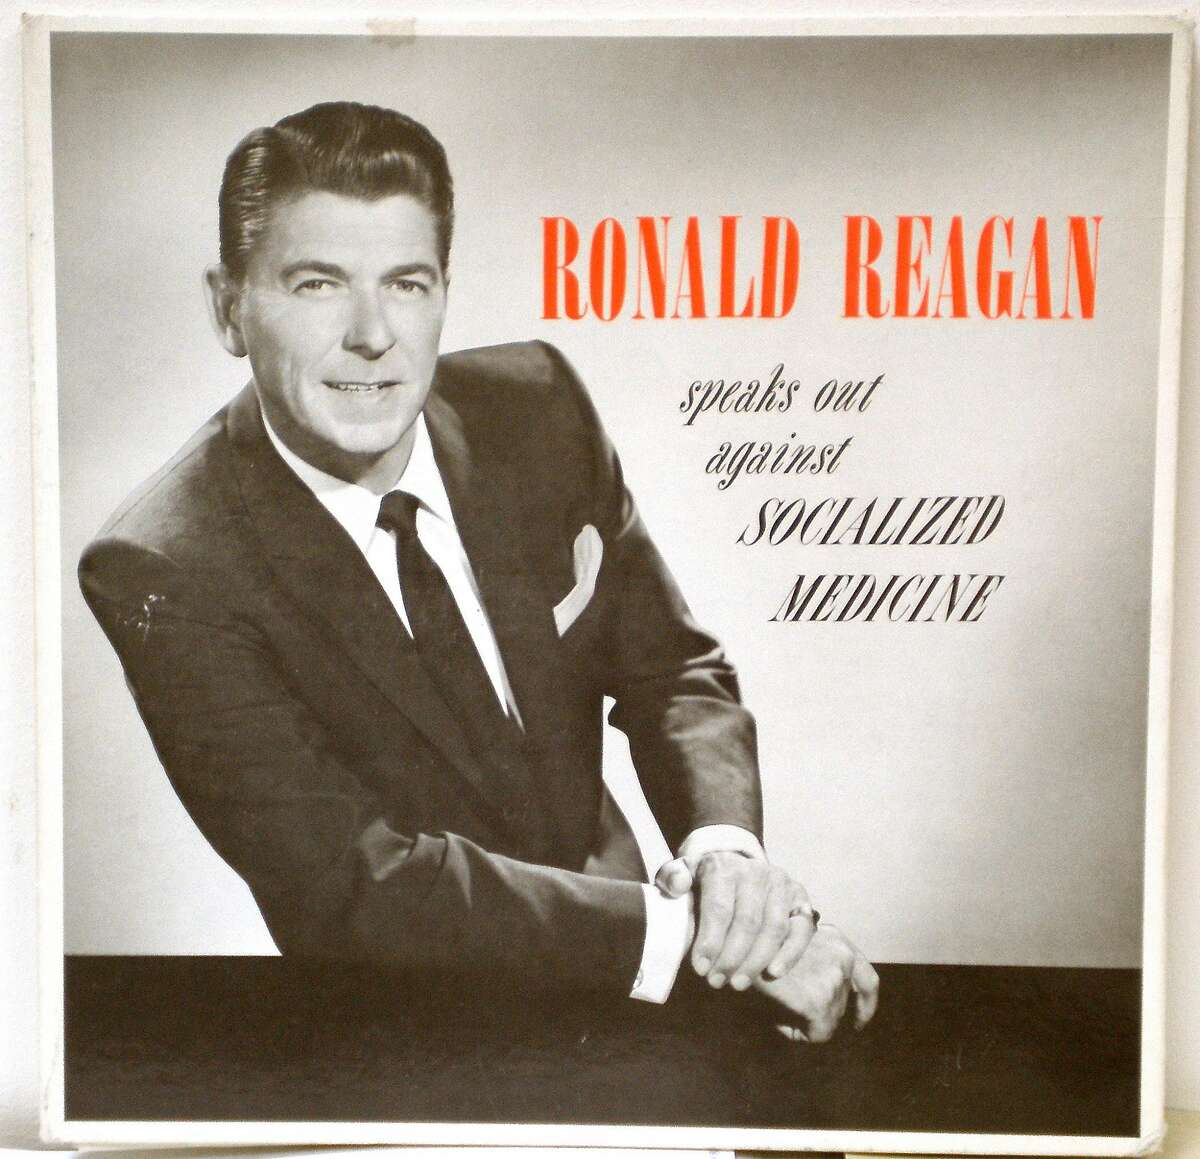 Ronald Reagan graced the cover of a recording he made for the American Medical Association in 1961 where he spoke out against the passage of Medicare.